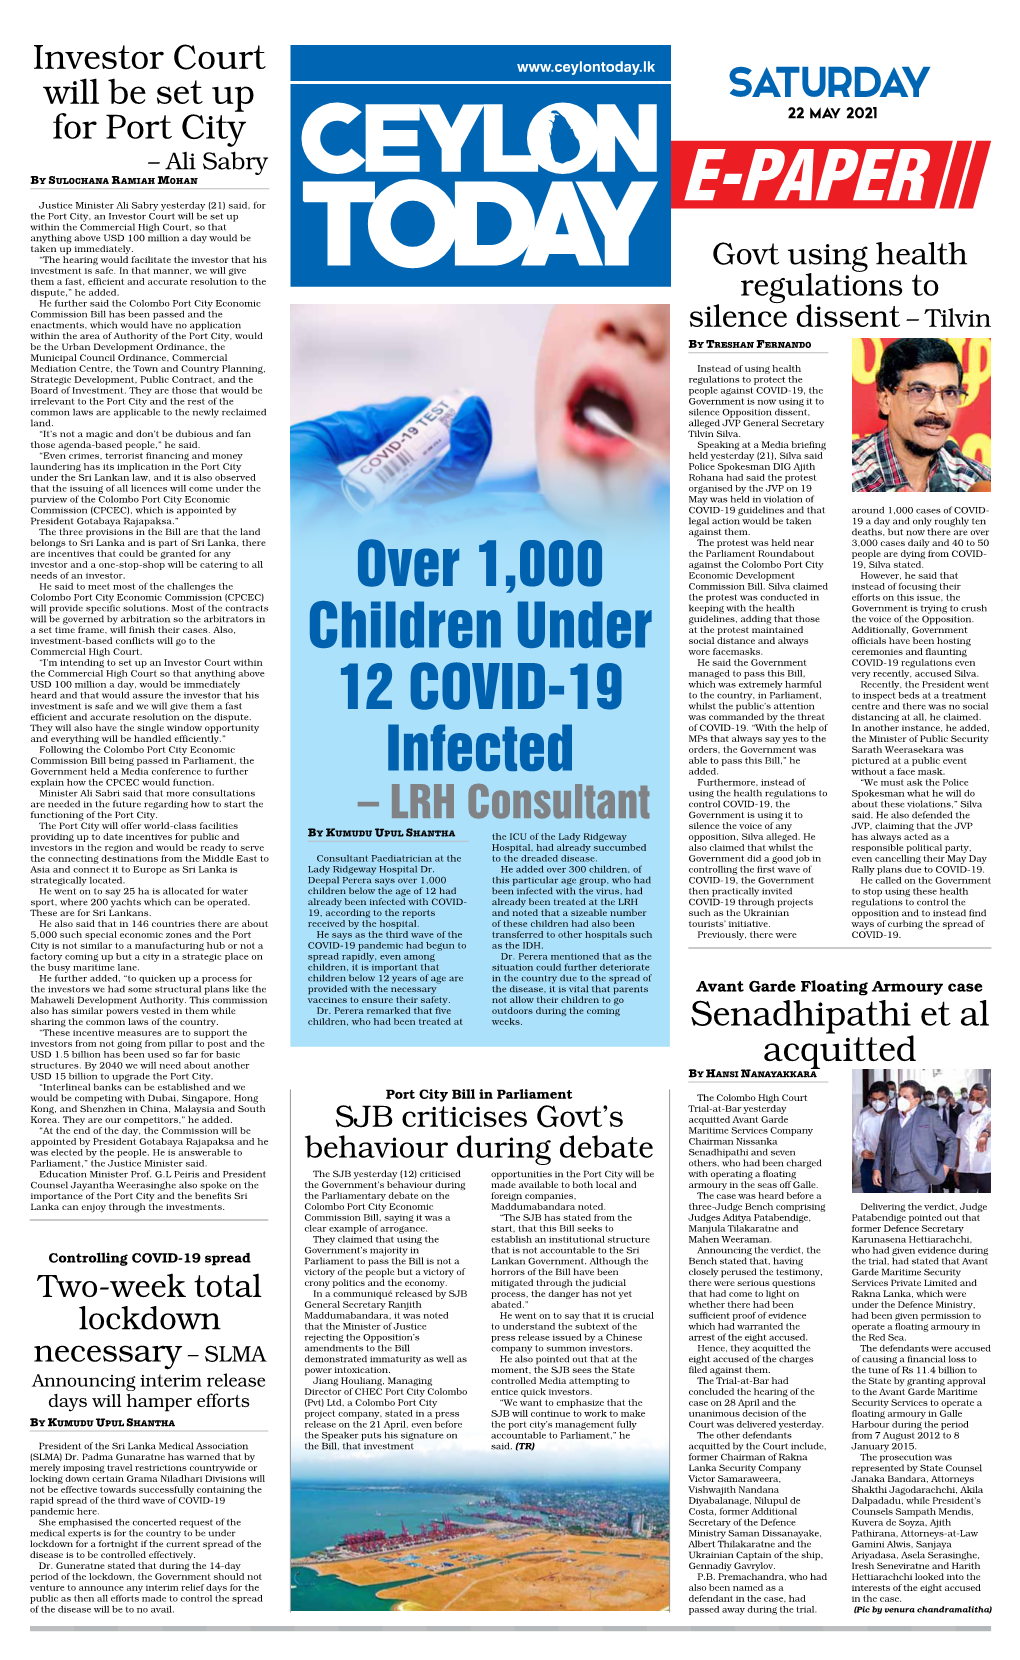 Saturday Over 1,000 Children Under 12 COVID-19 Infected